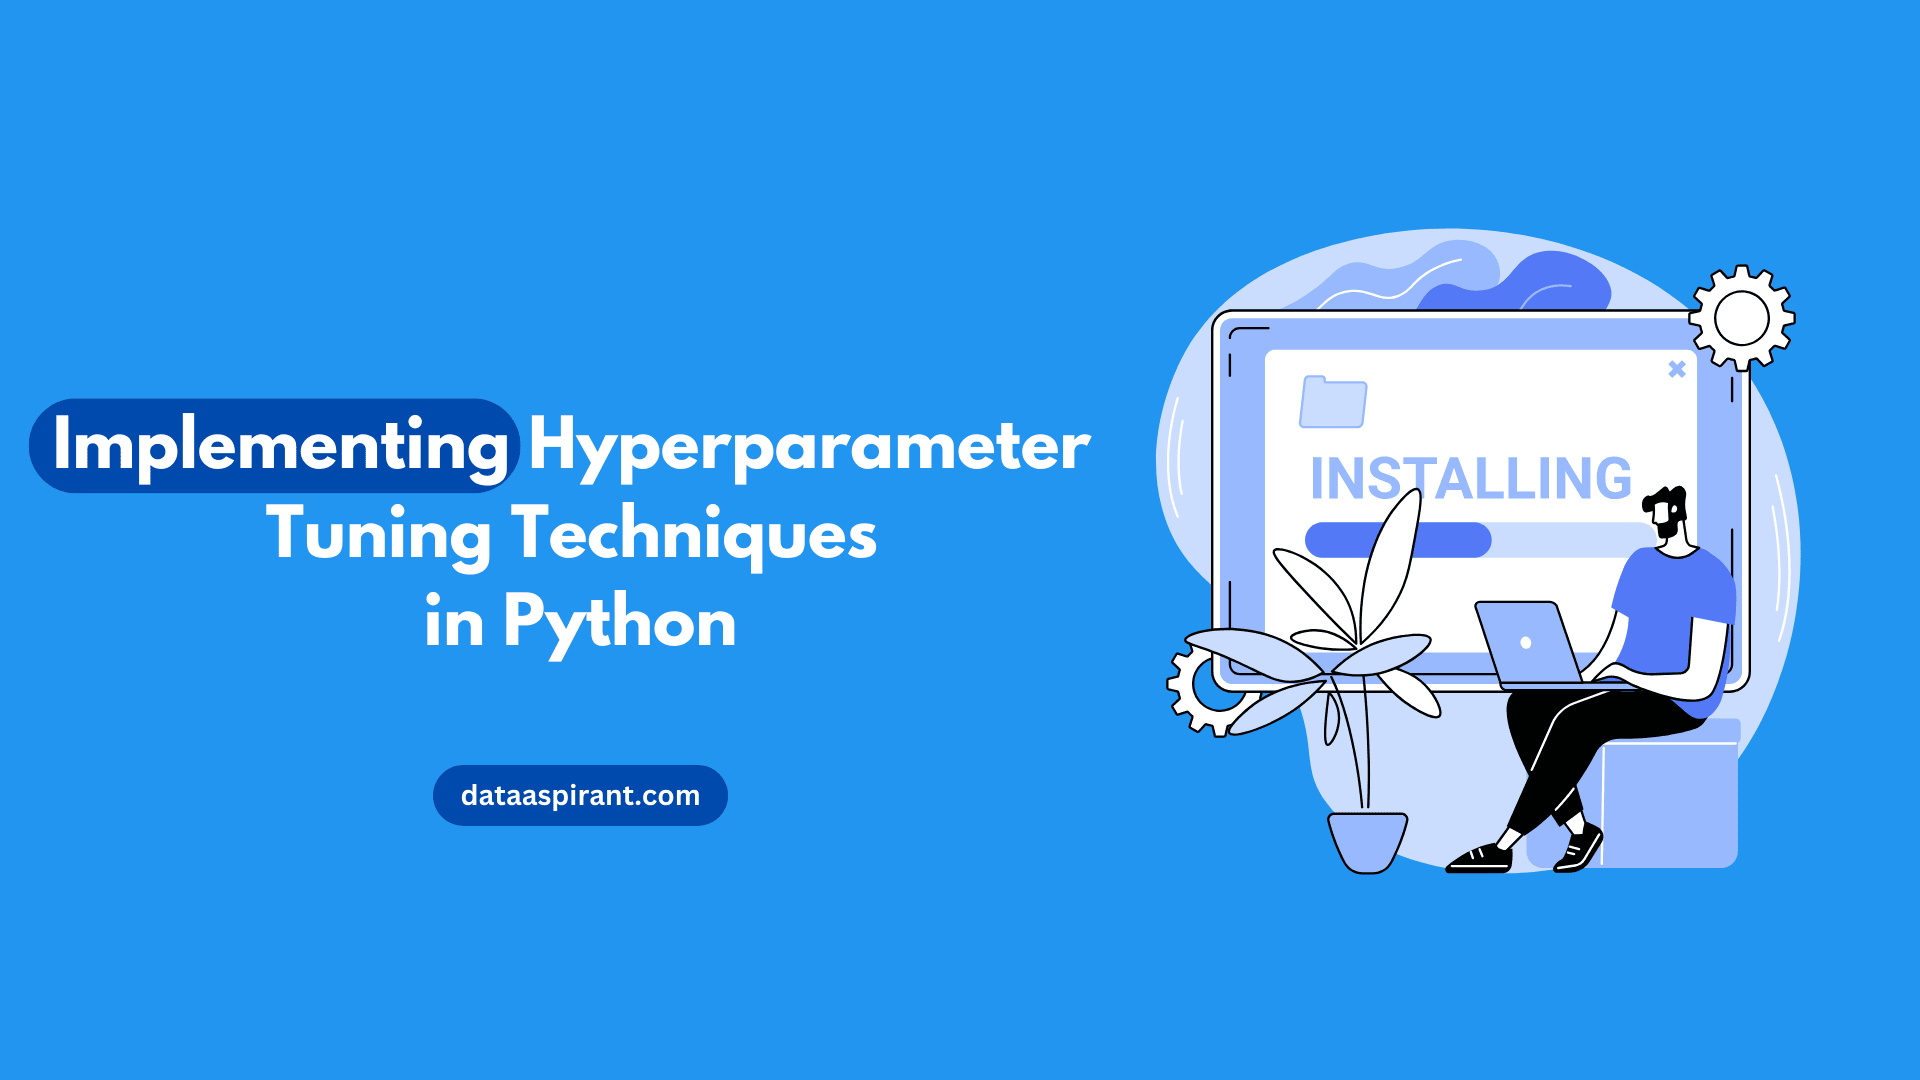 Implementing Hyperparameter Tuning Techniques in Python